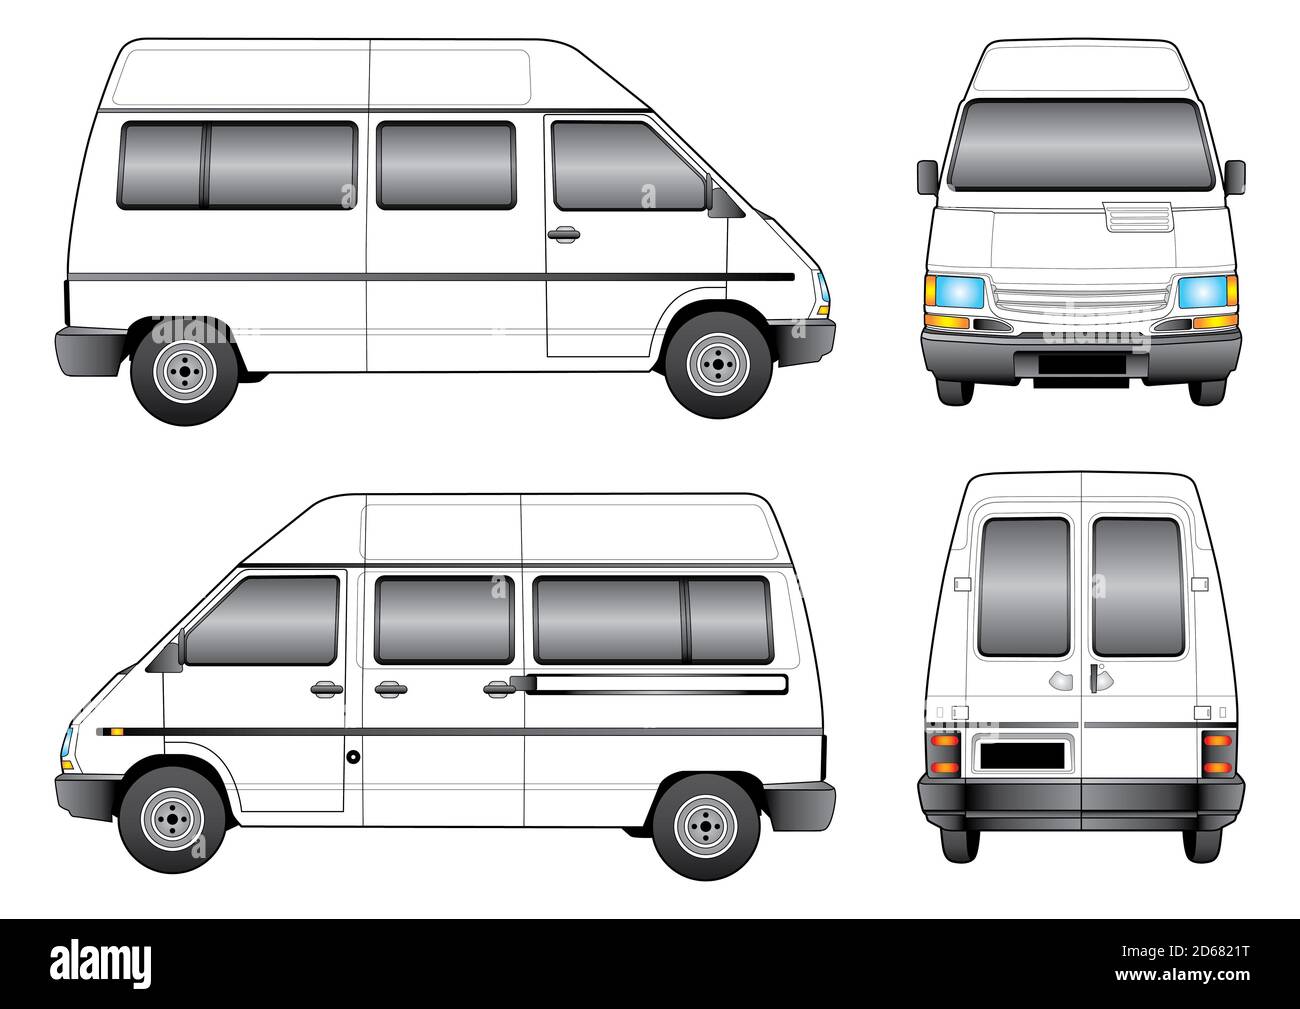 Vector van template isolated on white background Stock Photo